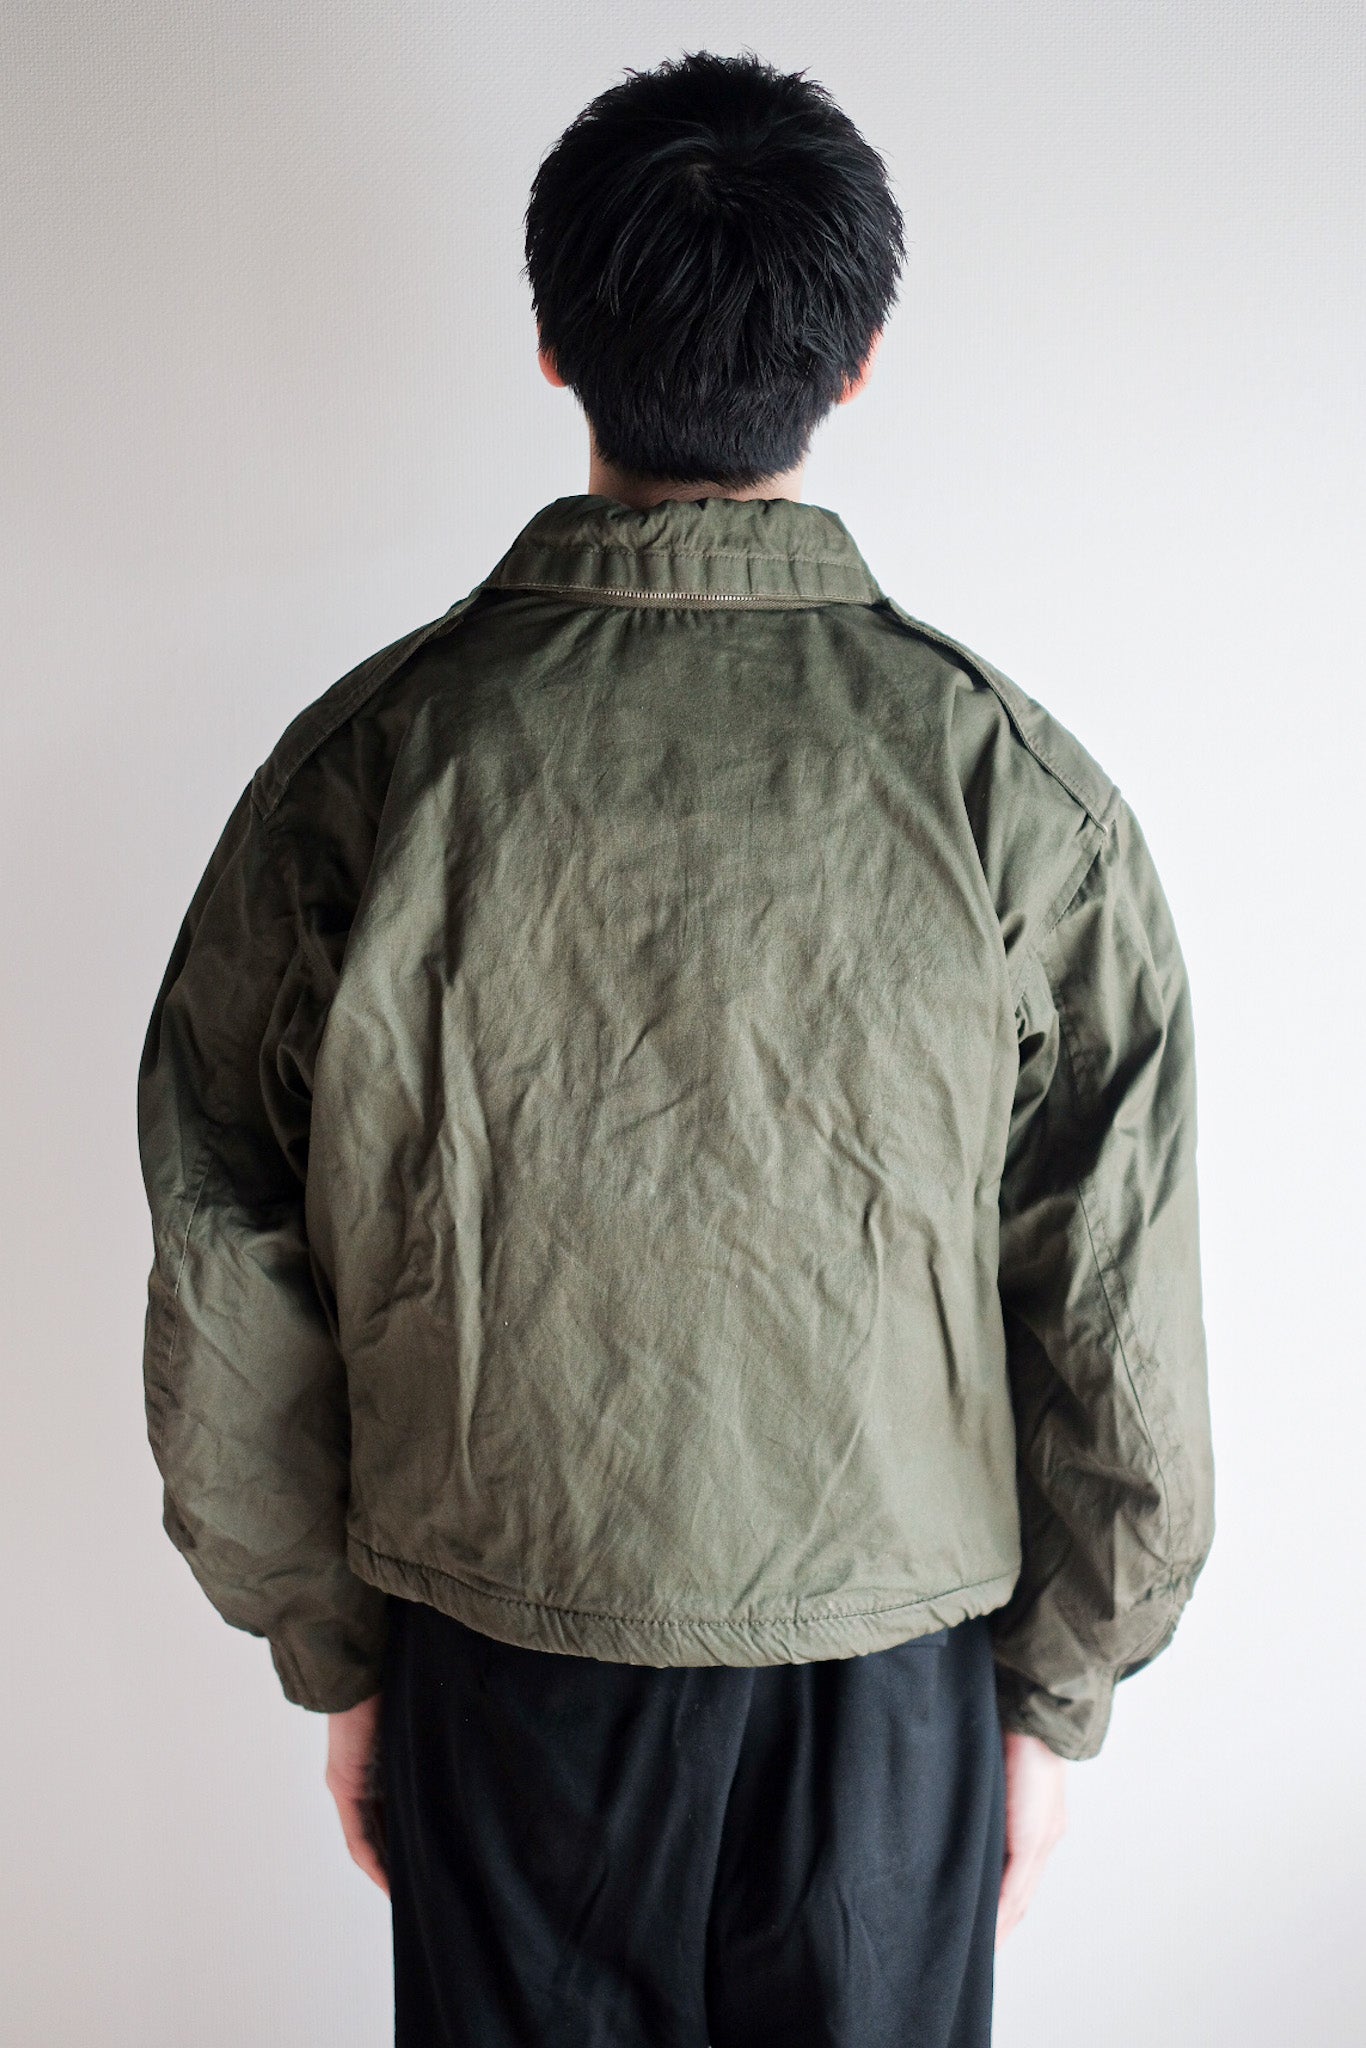 【~80's】Royal Air Force MK3 Cold Weather Flying Jacket Size.4